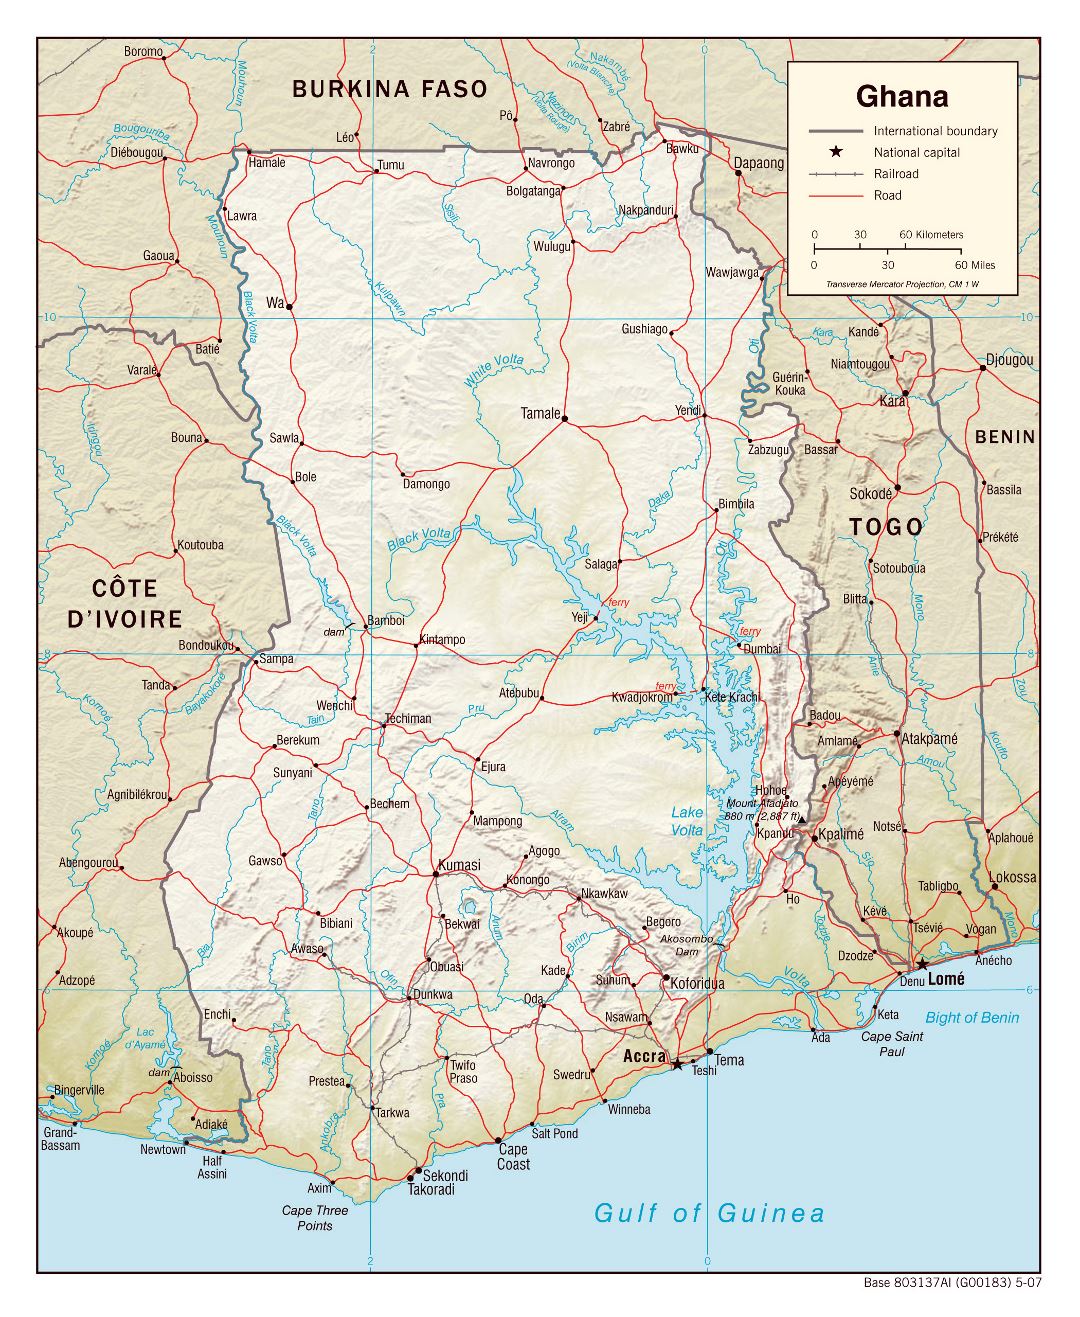 Large political map of Ghana with relief, roads, railroads and cities - 2007